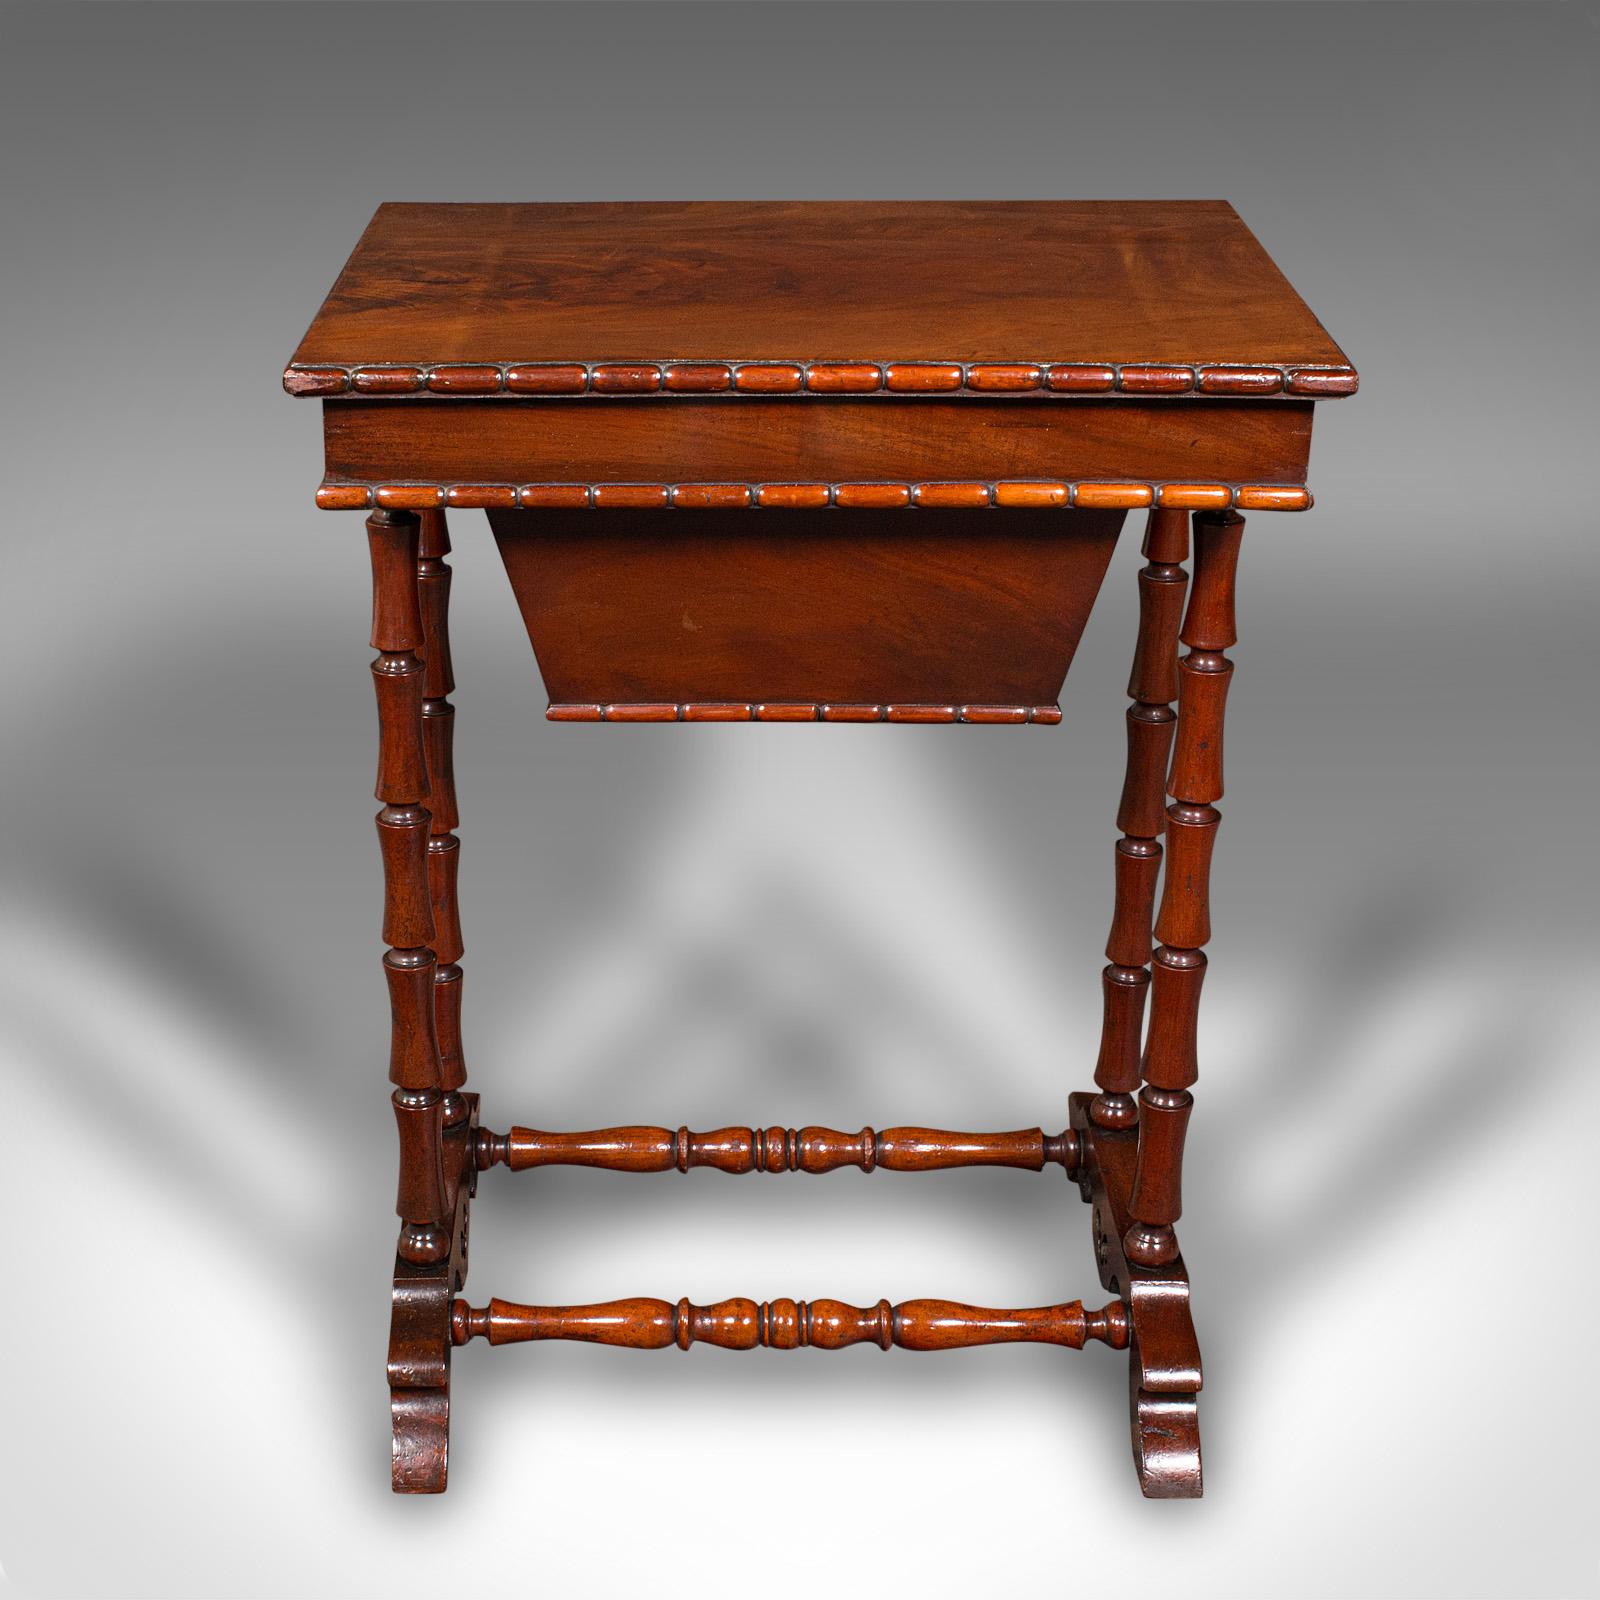 Small Antique Sewing Table, English, Flame, Ladies, Work, Regency, Circa 1830 In Good Condition For Sale In Hele, Devon, GB